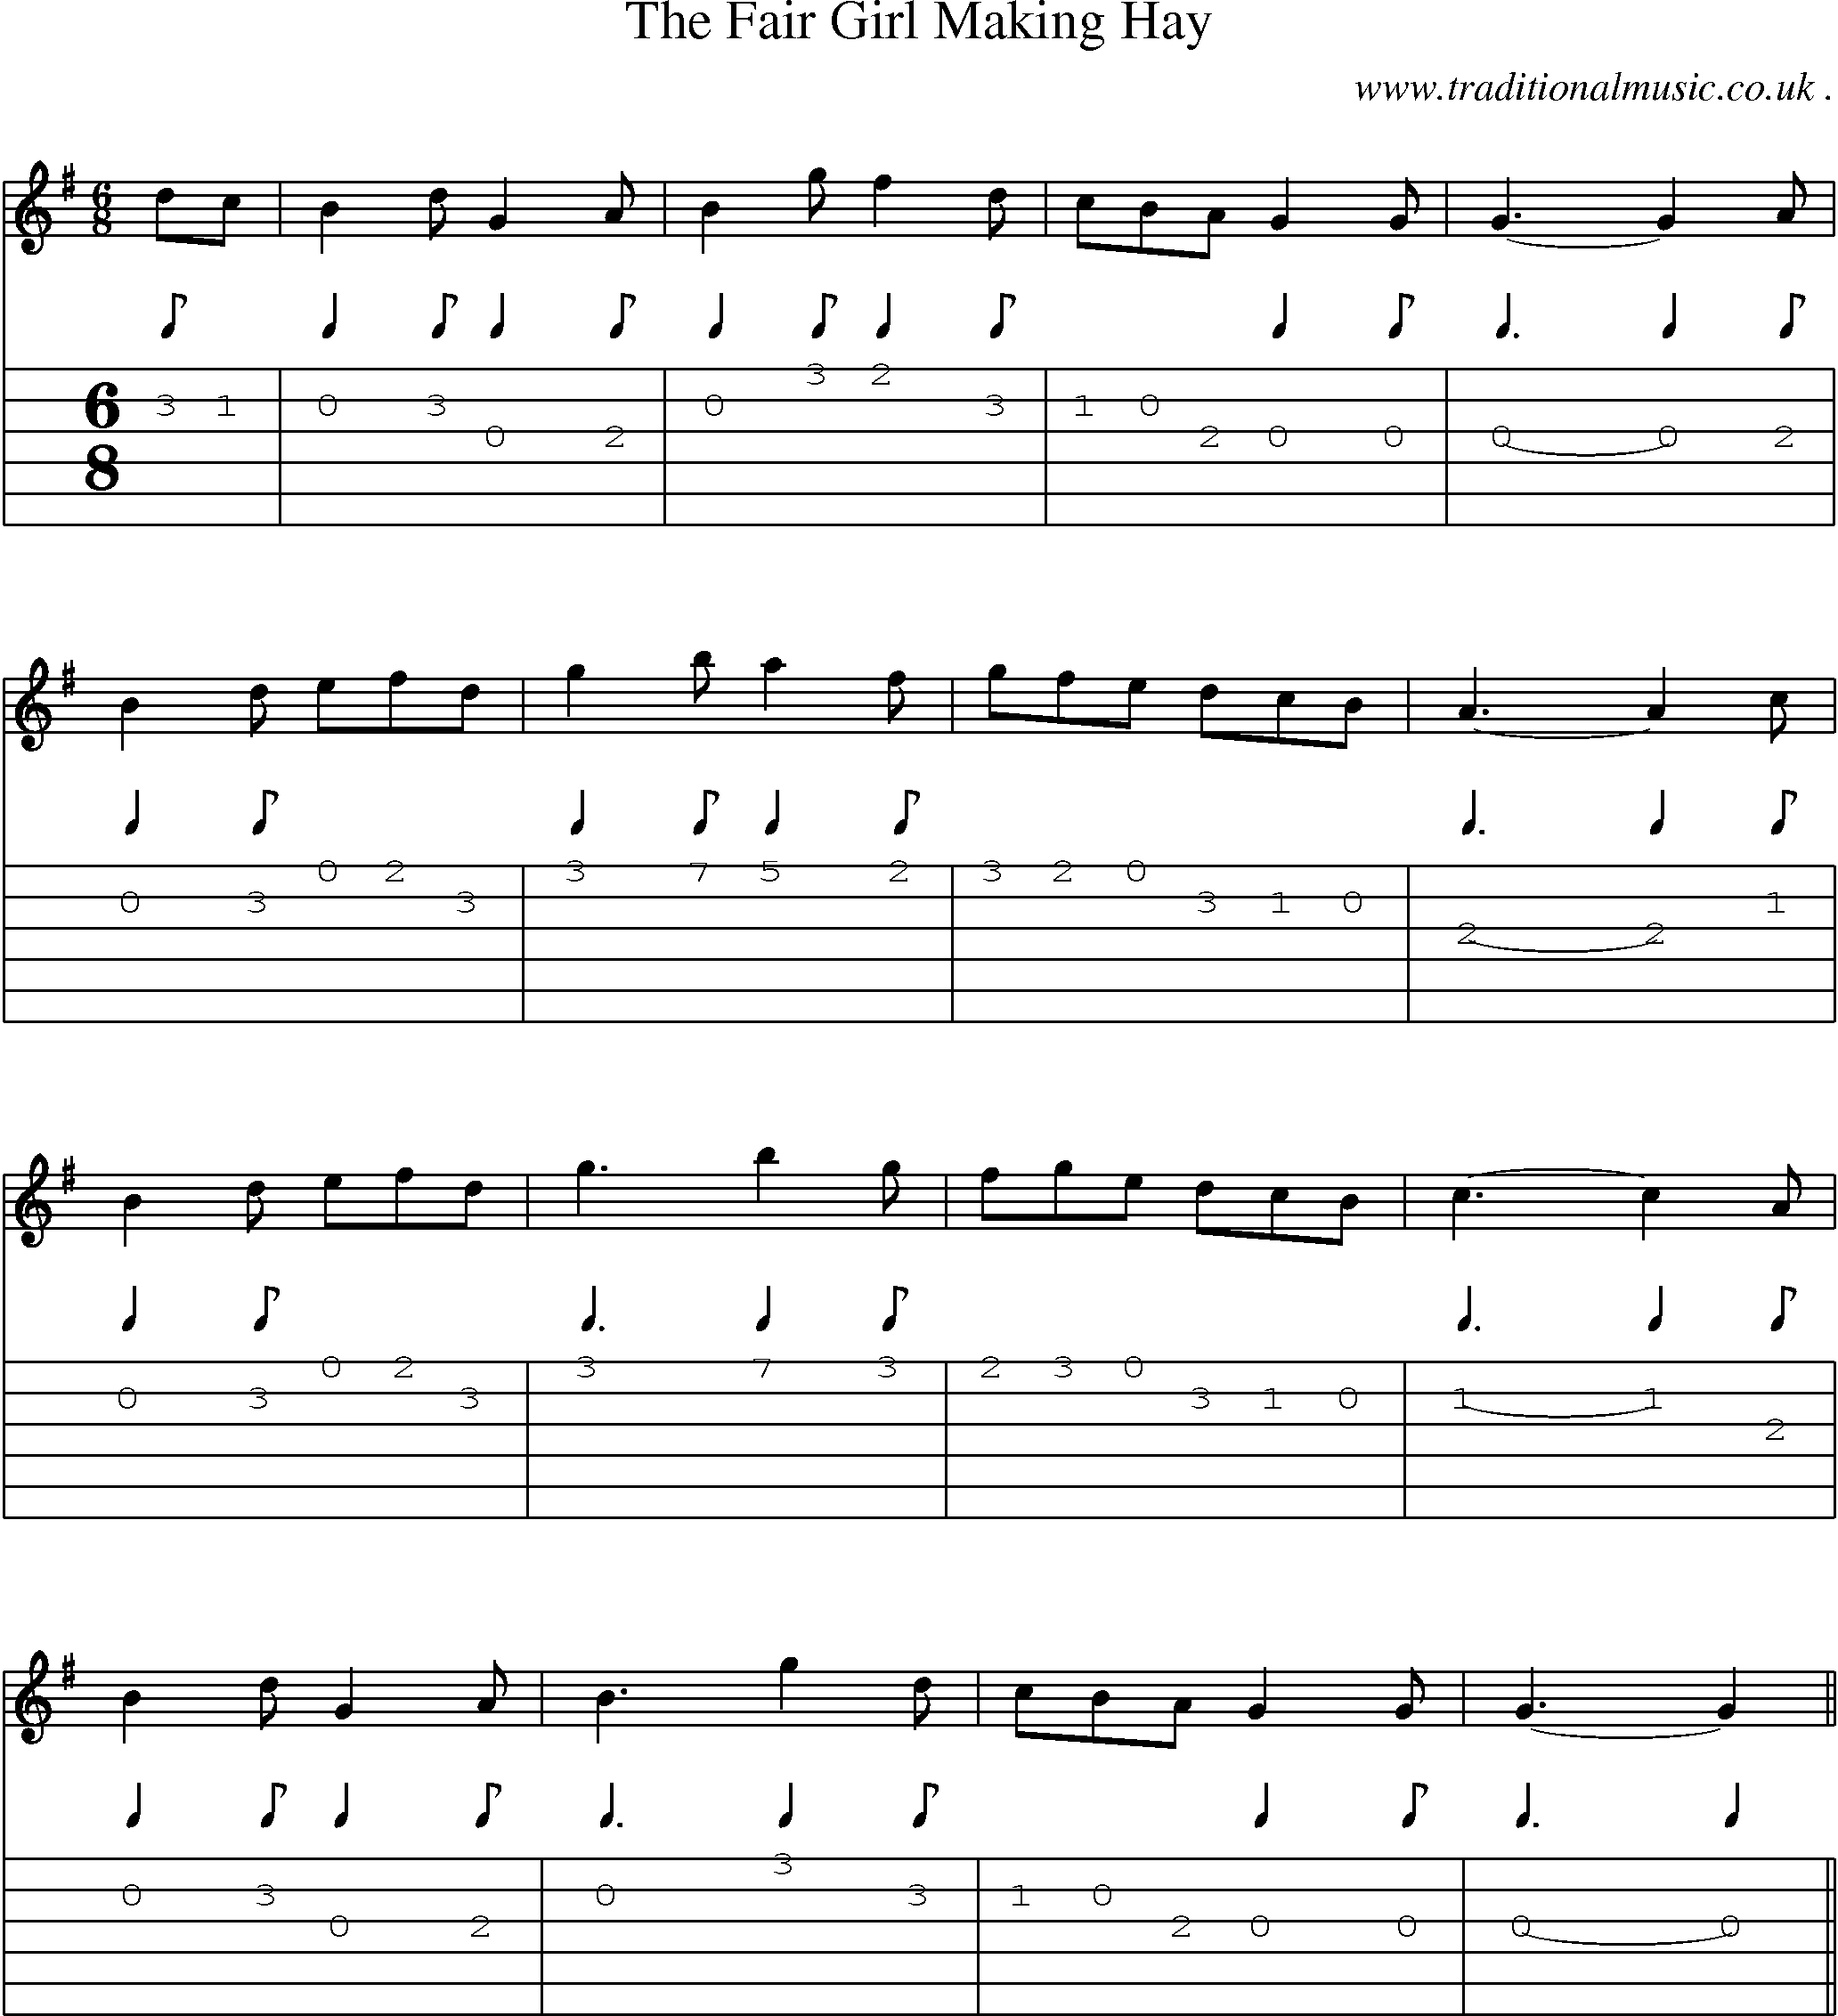 Sheet-Music and Guitar Tabs for The Fair Girl Making Hay